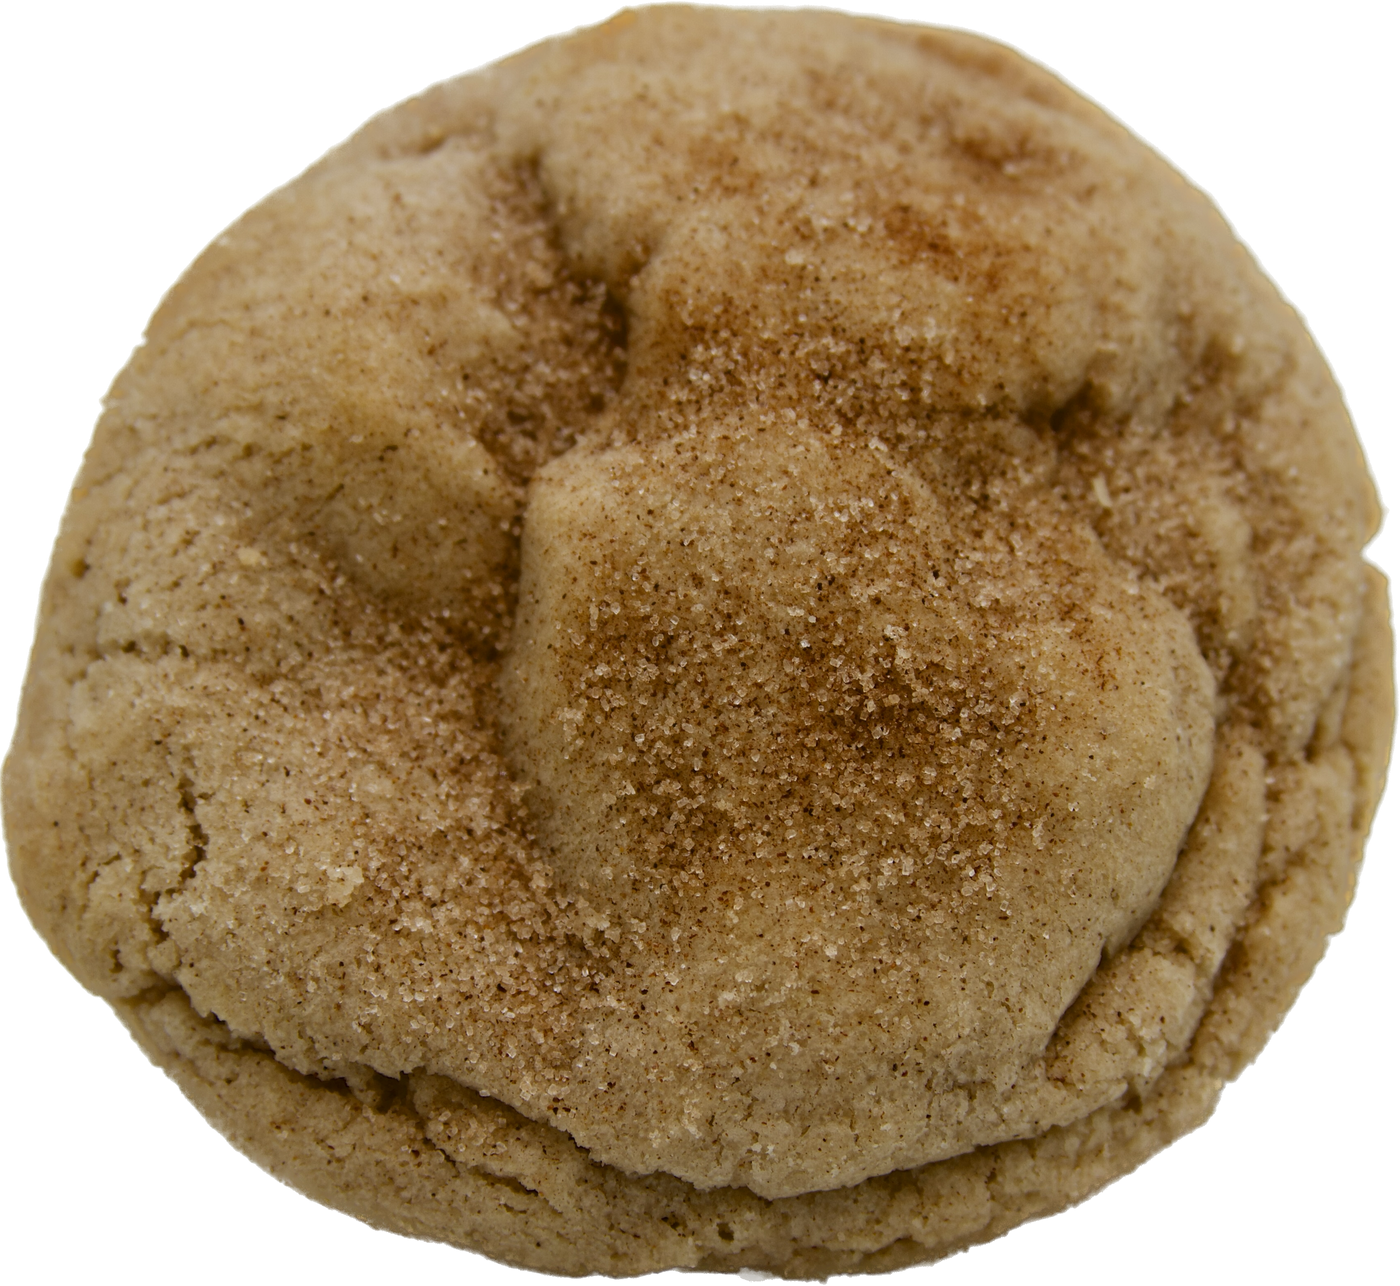 A freshly baked snickerdoodle cookie with a soft and chewy texture and a generous dusting of cinnamon sugar on top